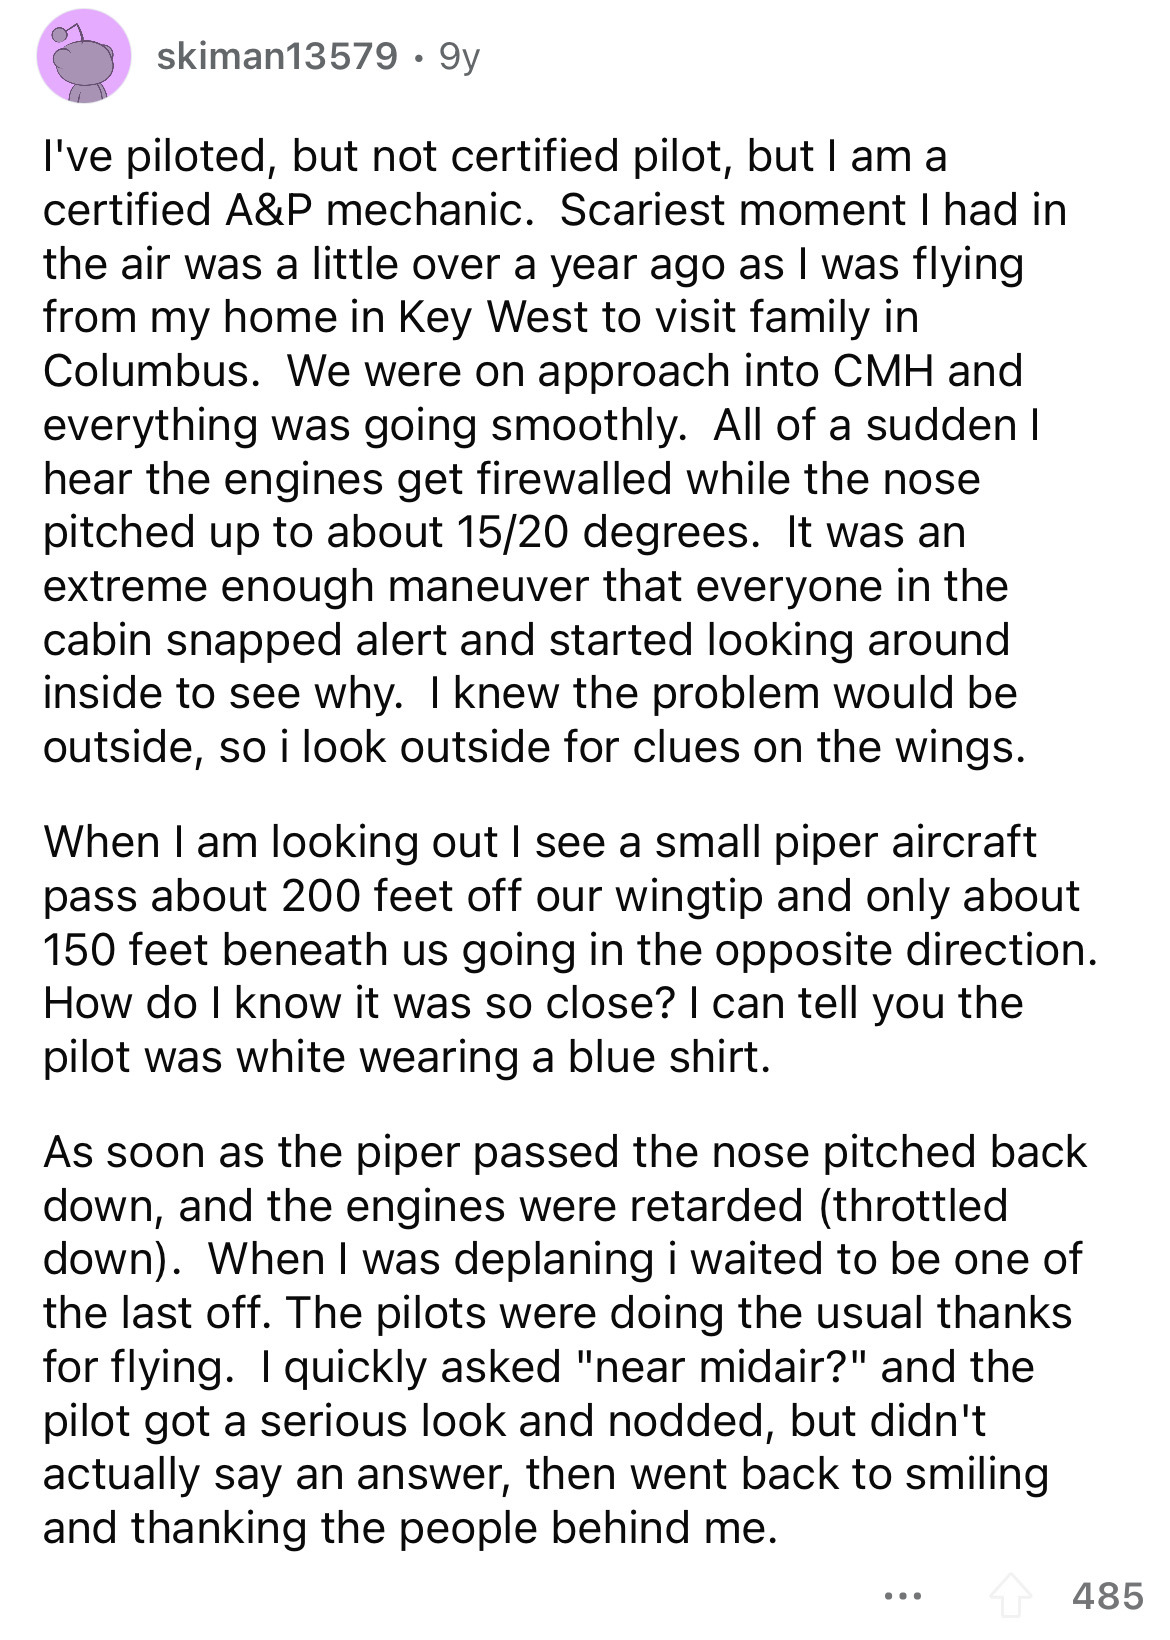 document - skiman13579 9y I've piloted, but not certified pilot, but I am a certified A&P mechanic. Scariest moment I had in the air was a little over a year ago as I was flying from my home in Key West to visit family in Columbus. We were on approach int